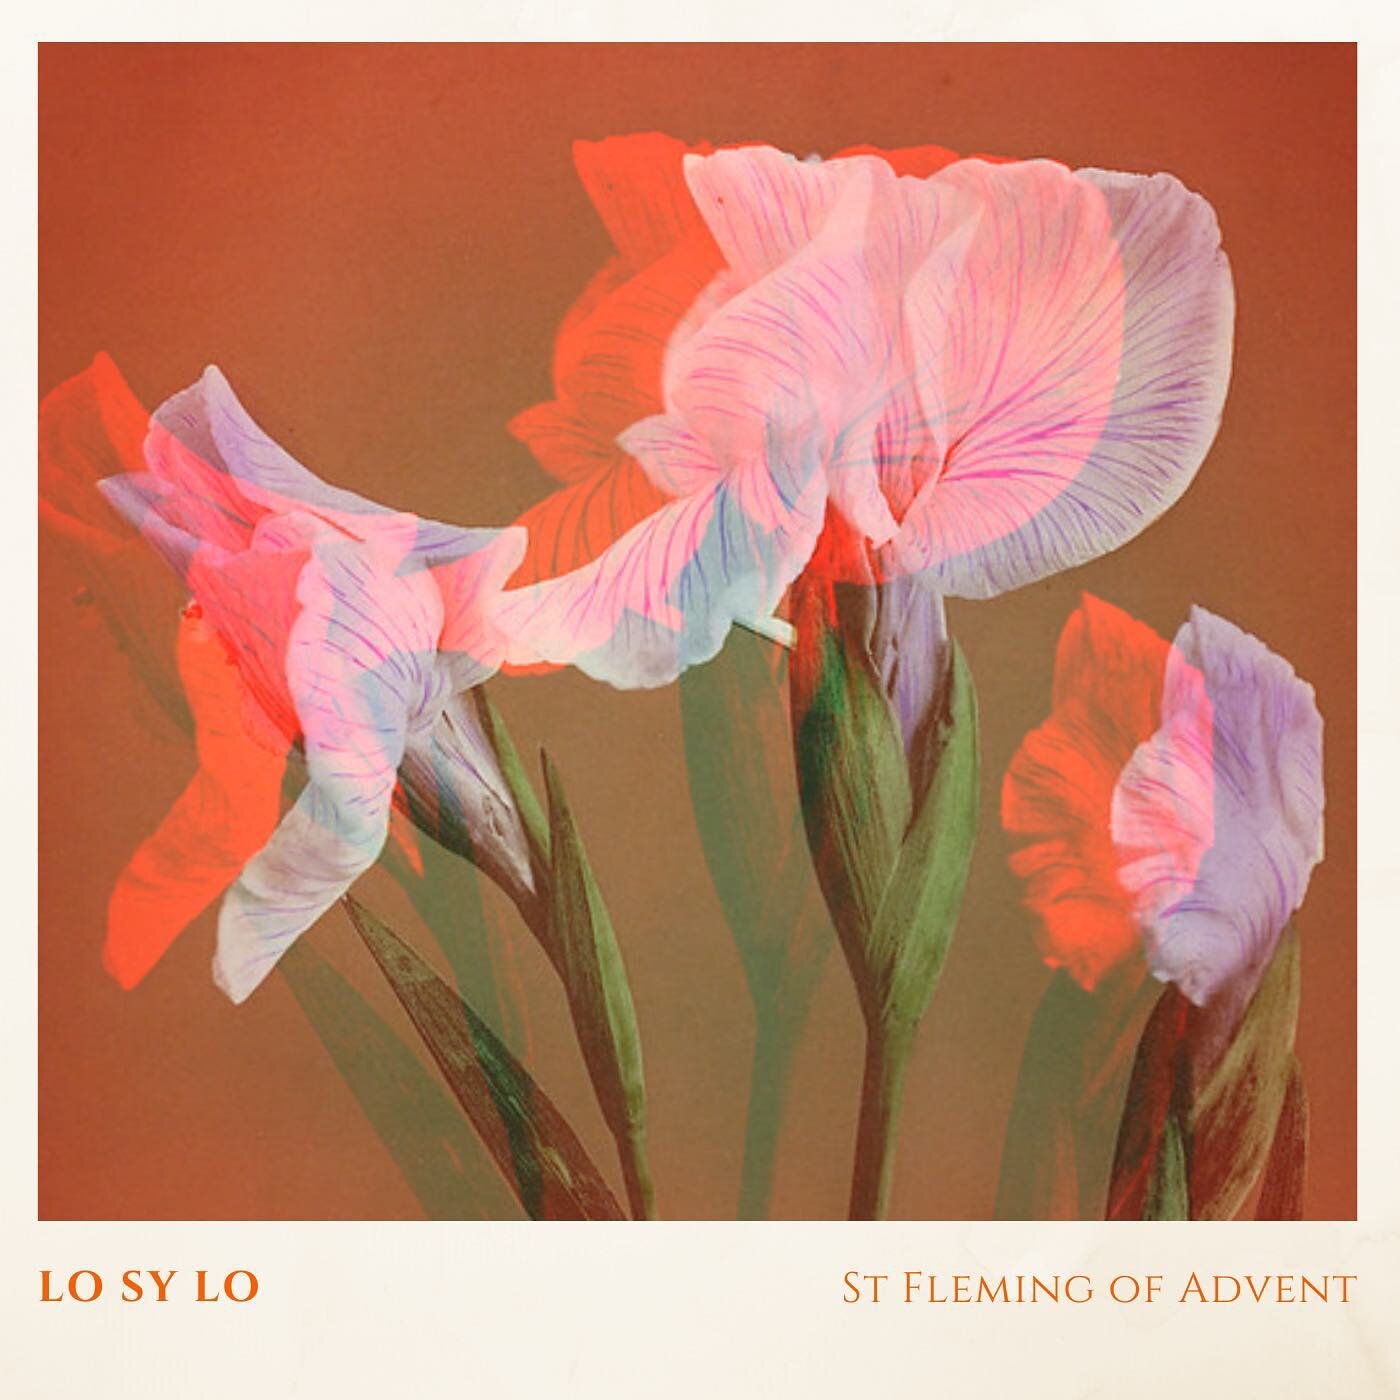 ✨ It&rsquo;s here! ✨

I recorded a few songs for the Advent season. You can find them at www.losylo.bandcamo.com. (Link in bio!)
.
.
.
This small passion project is dedicated to Fleming Rutledge, whose theological work has been life-giving to my stor